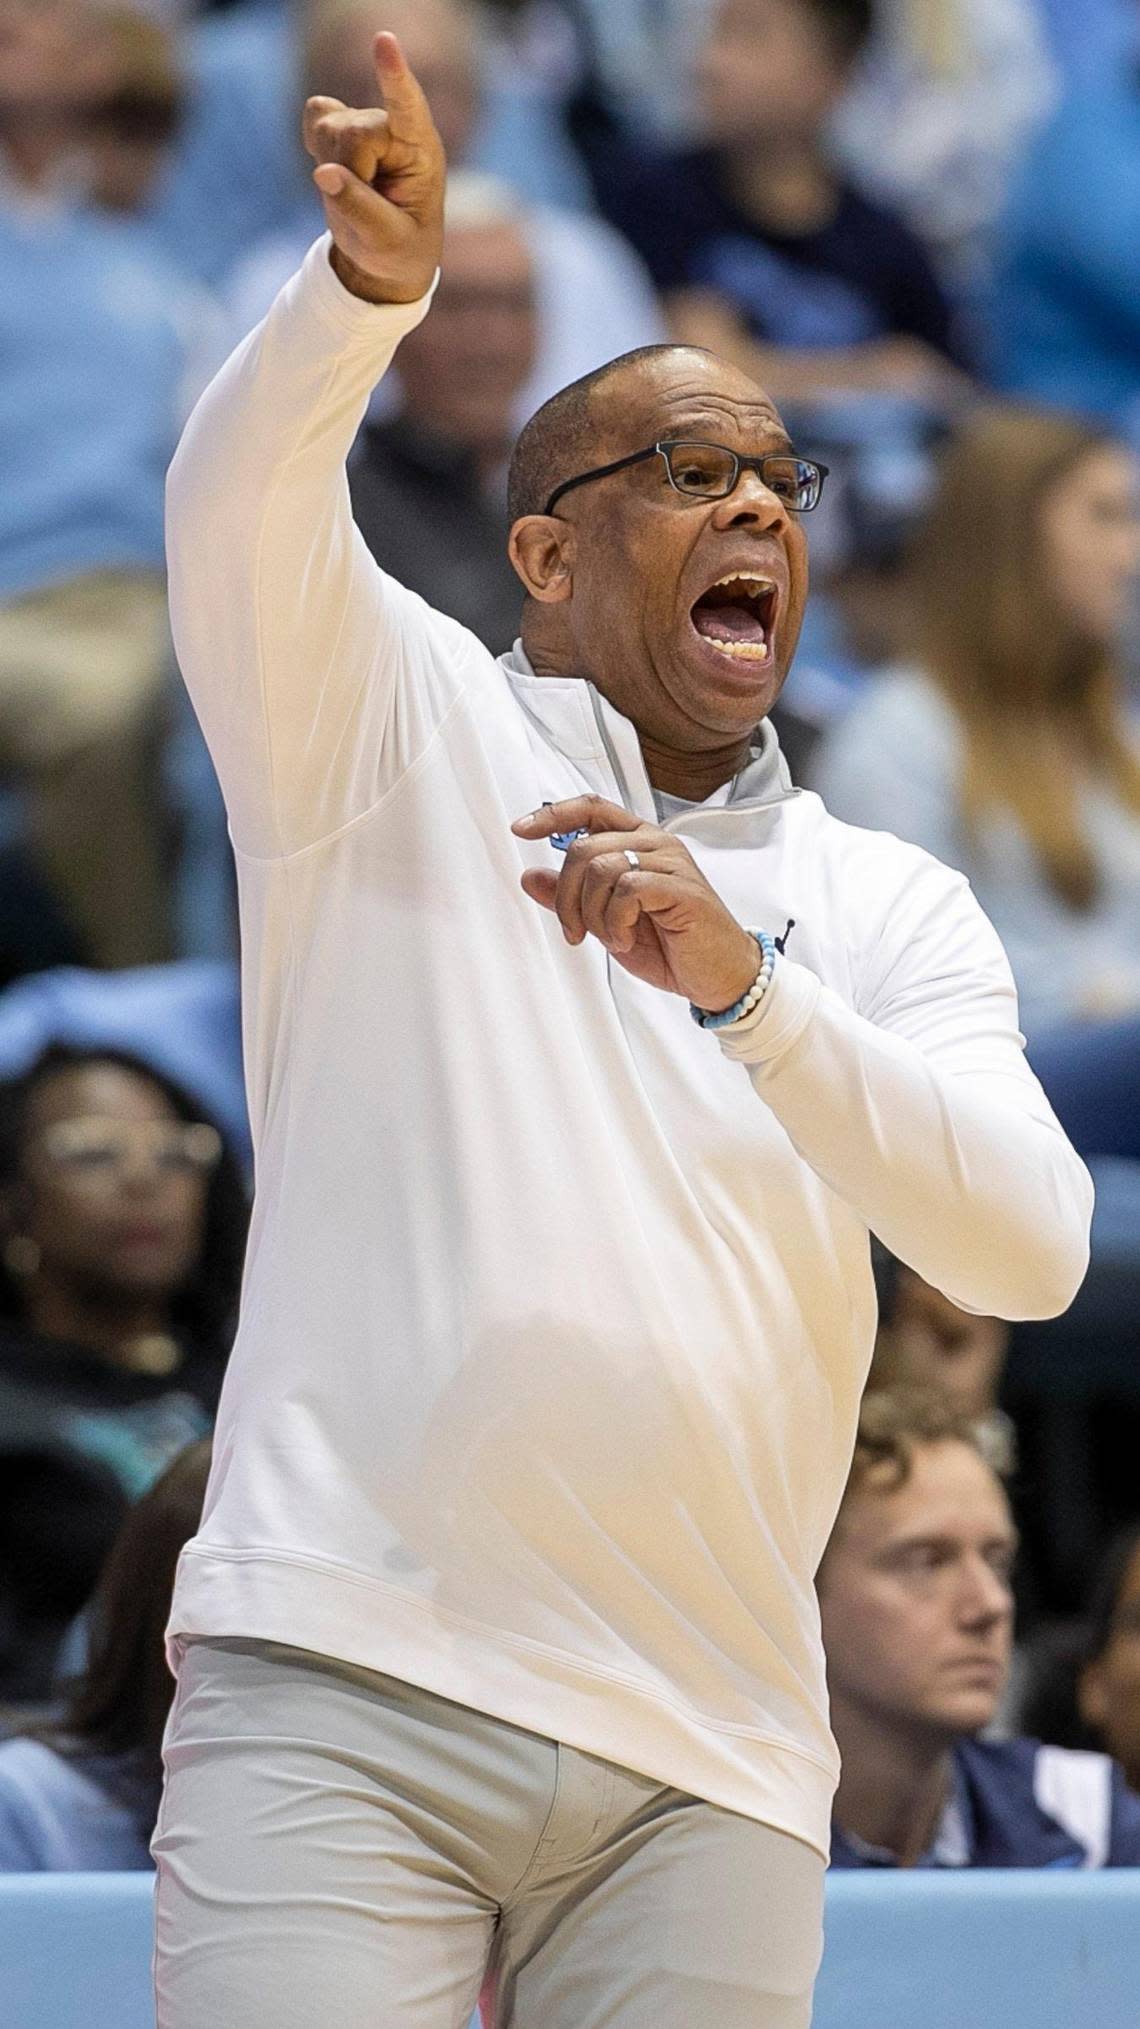 North Carolina coach Hubert Davis directs his team in the second half against James Madison on Sunday, November 20, 2022 at the Smith Center in Chapel Hill, N.C.